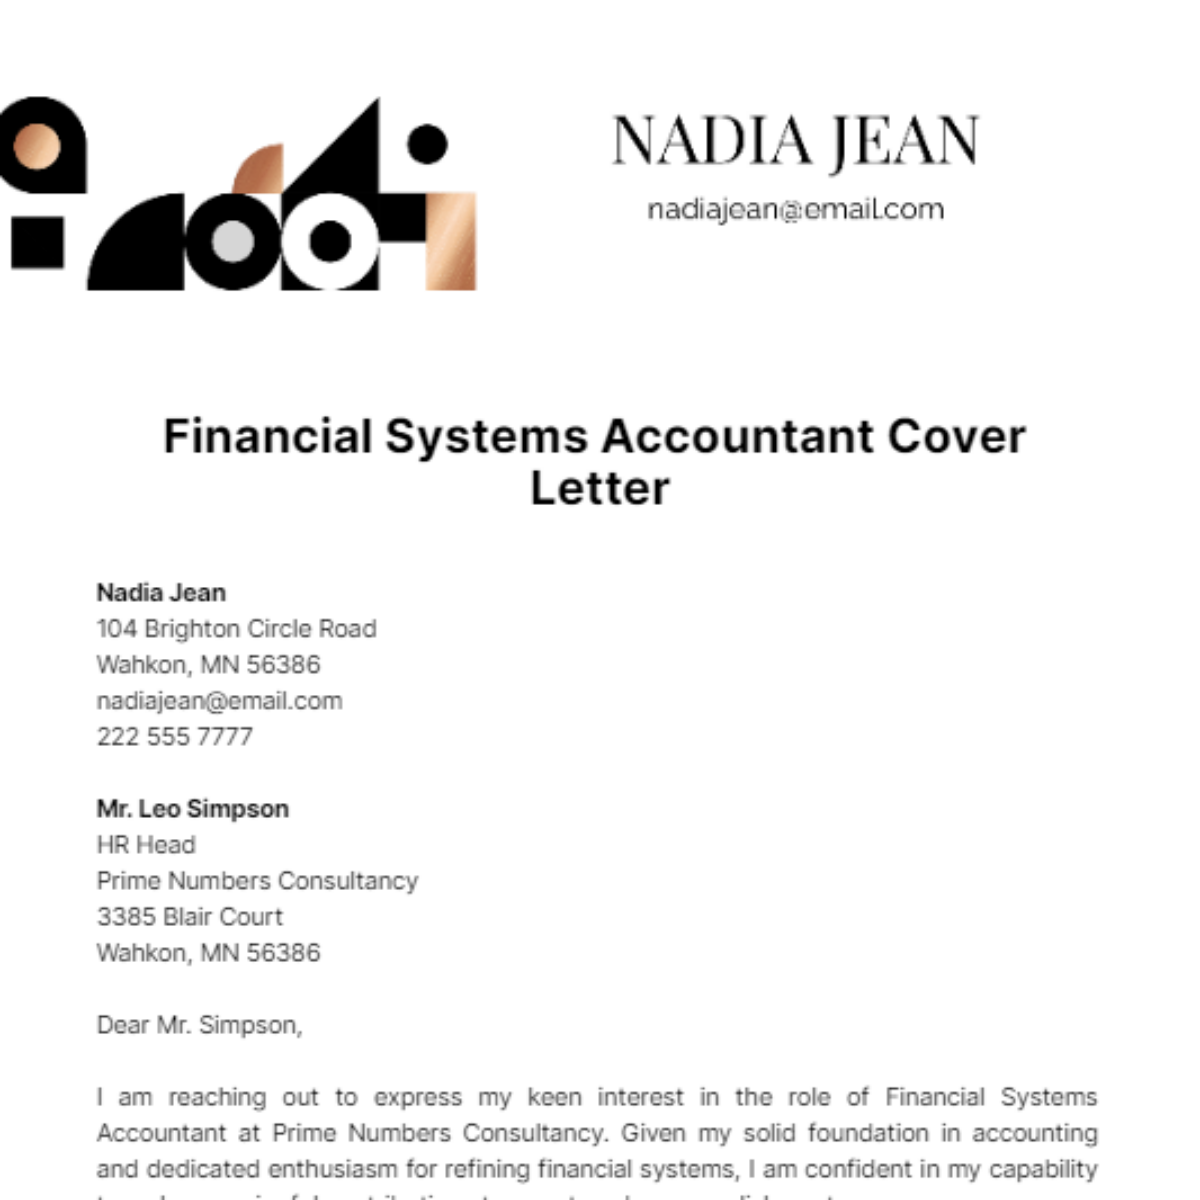 Financial Systems Accountant Cover Letter Template